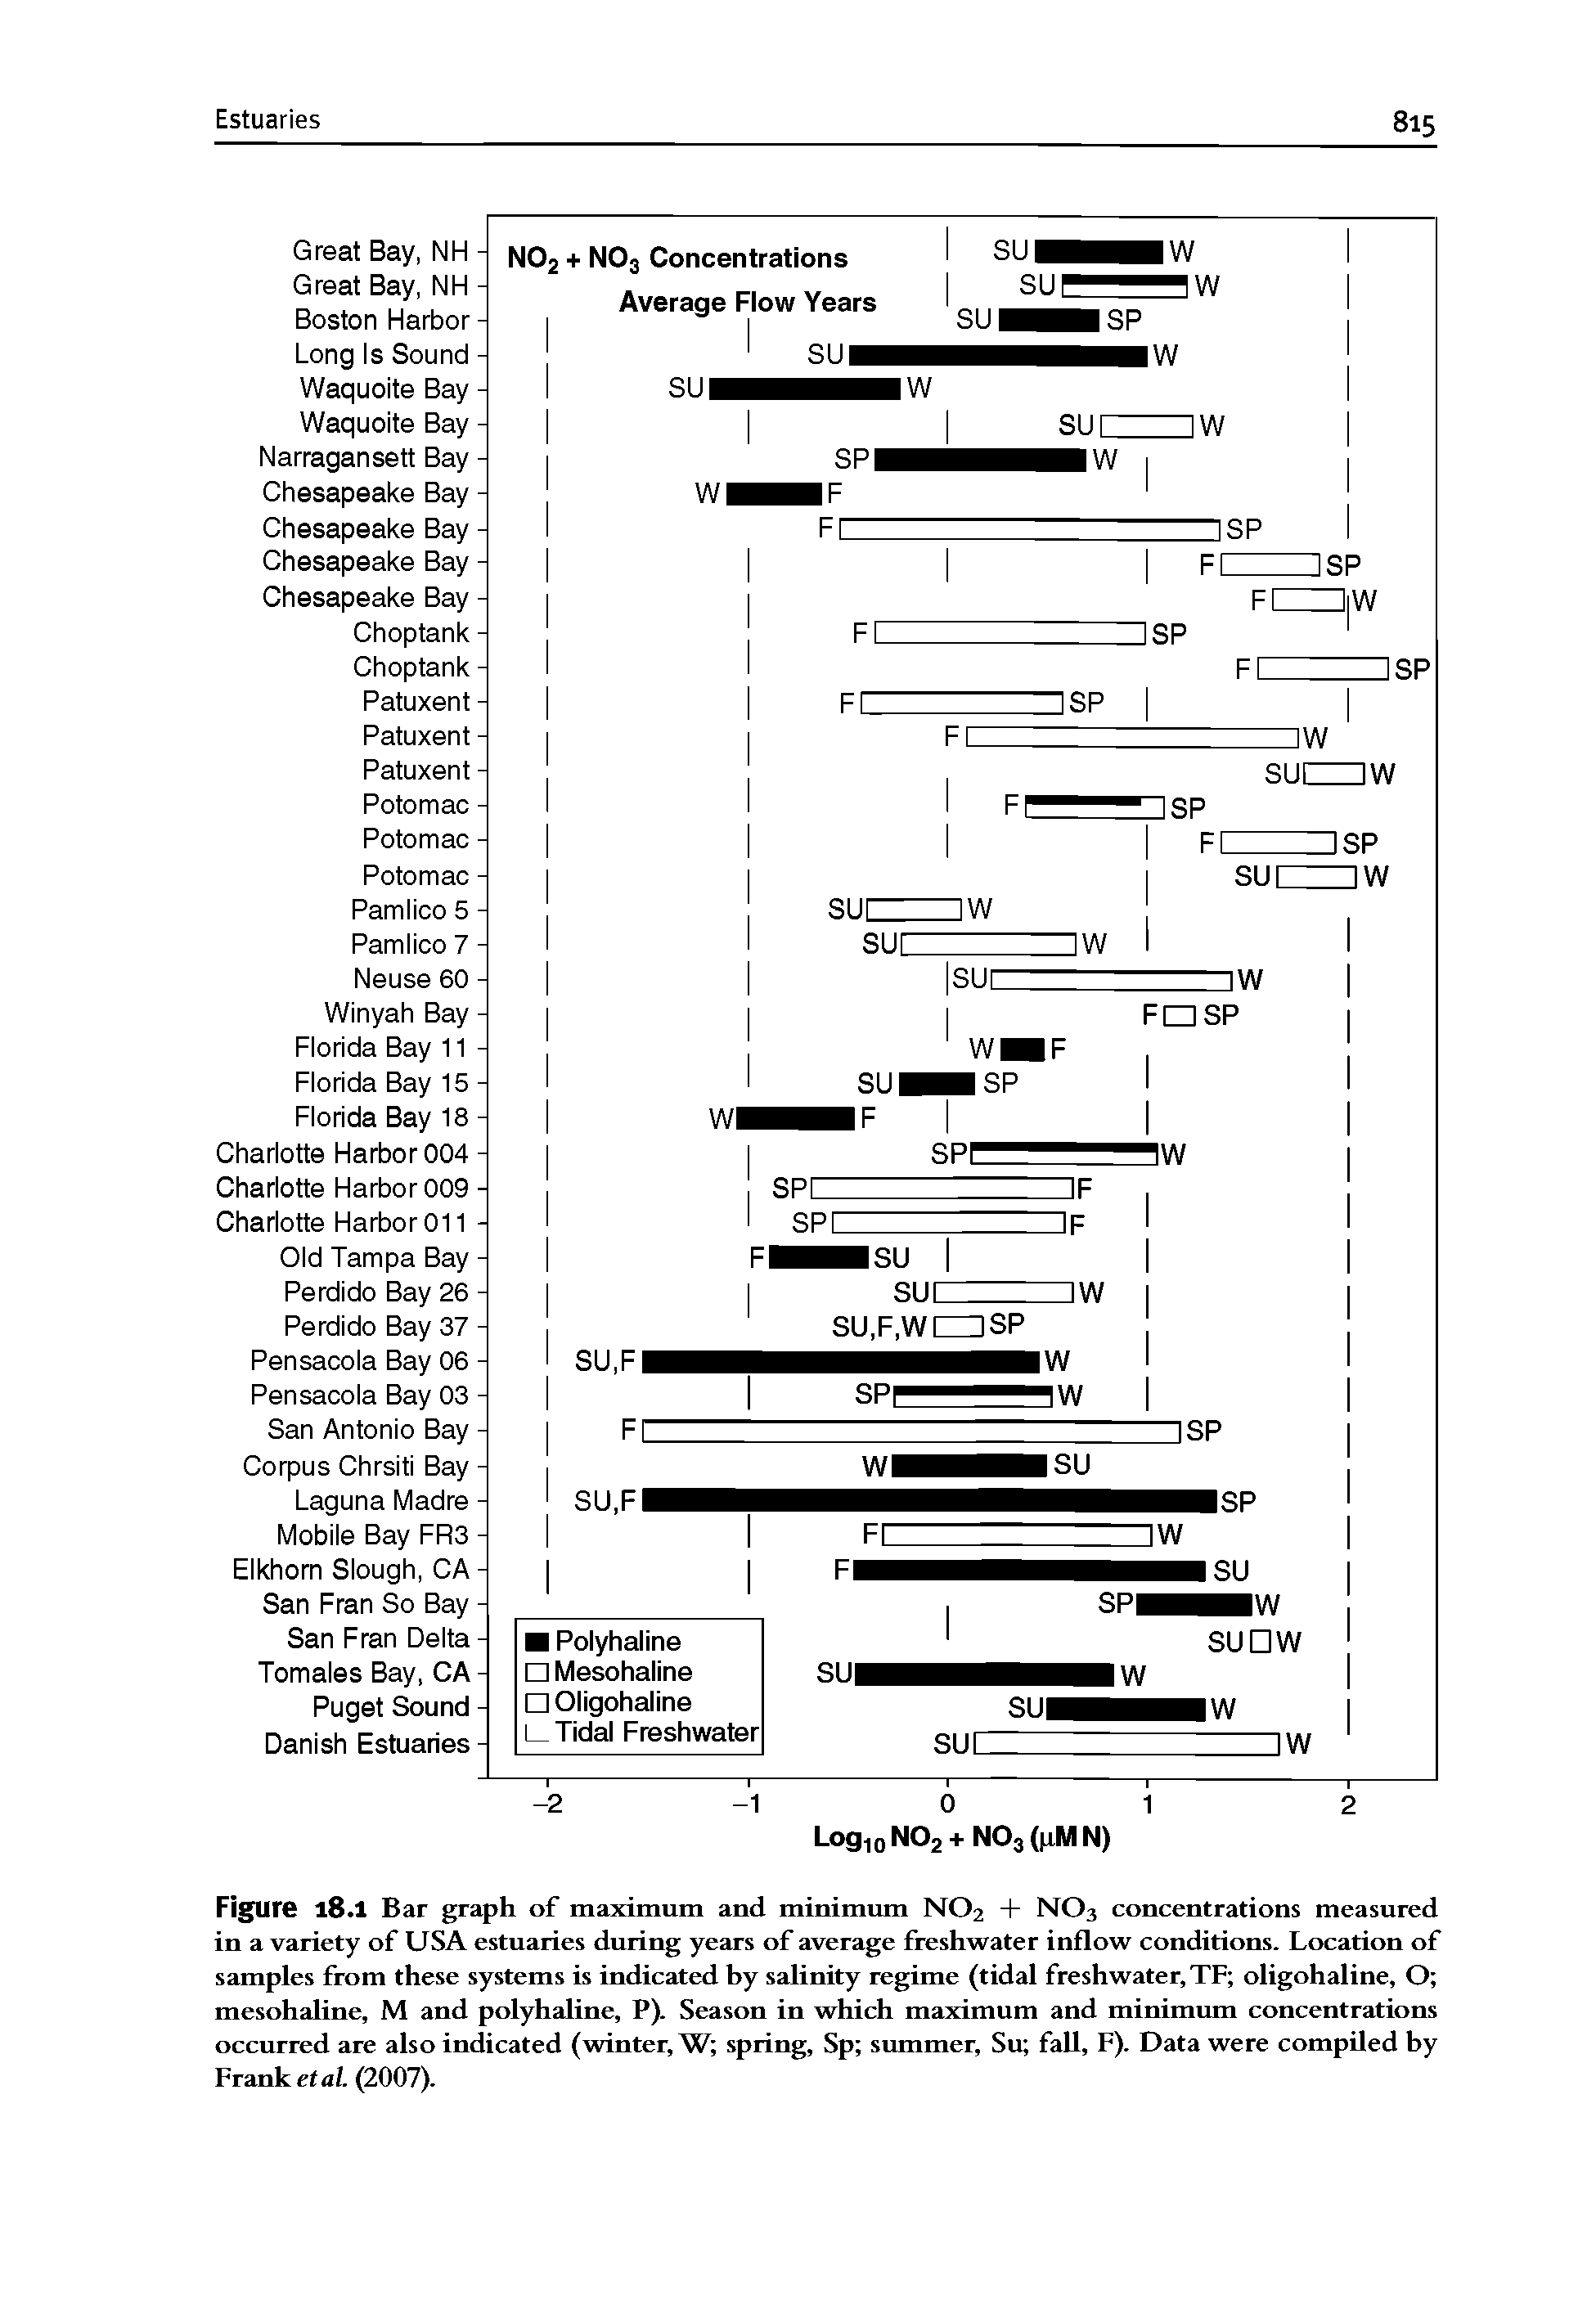 Figure 18.1 Bar graph of maximum and minimum NO2 + NO3 concentrations measured in a variety of USA estuaries during years of average freshwater inflow conditions. Location of samples from these systems is indicated hy salinity regime (tidal freshwater, TF oligohaline, O mesohaline, M and polyhaline, P). Season in which maximum and minimum concentrations occurred are also indicated (winter, W spring, Sp summer, Su fall, F). Data were compiled hy Frank eta/. (2007).